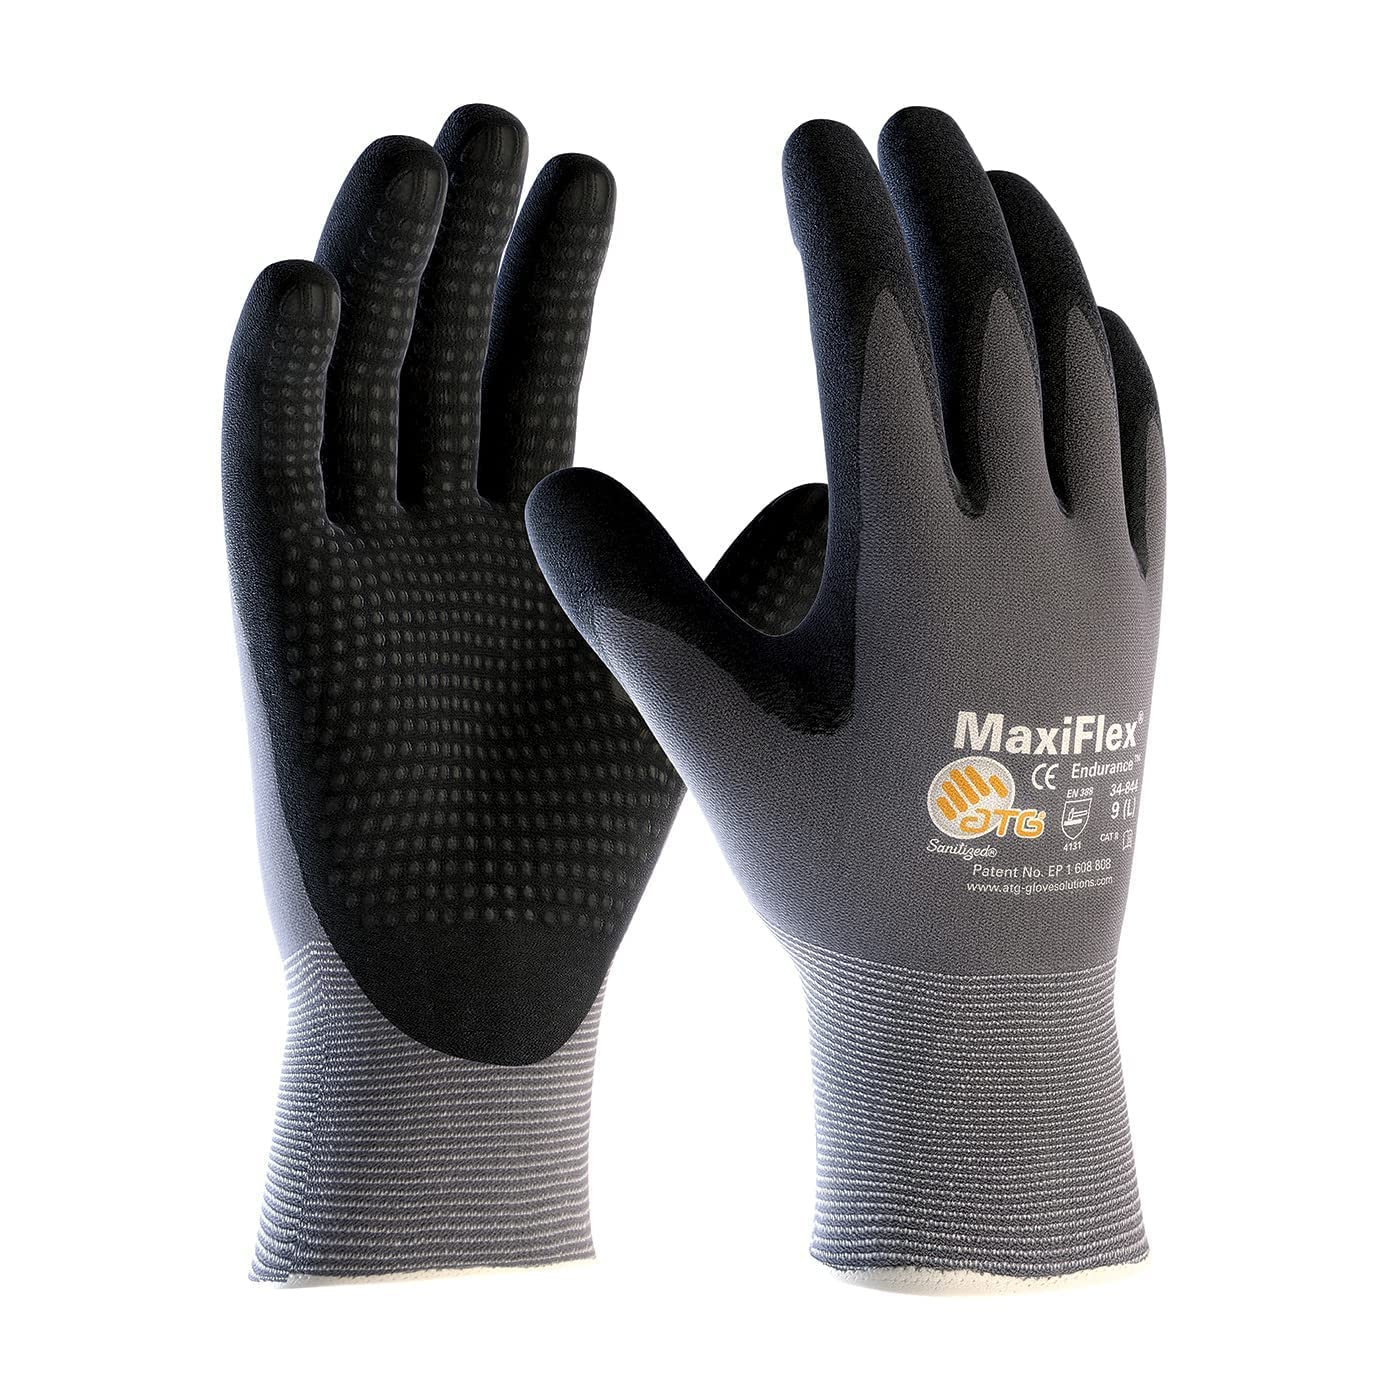 ATG 3 Pack MaxiFlex Endurance 34-844 Seamless Knit Nylon Work Glove with Nitrile Coated Grip on Palm & Fingers